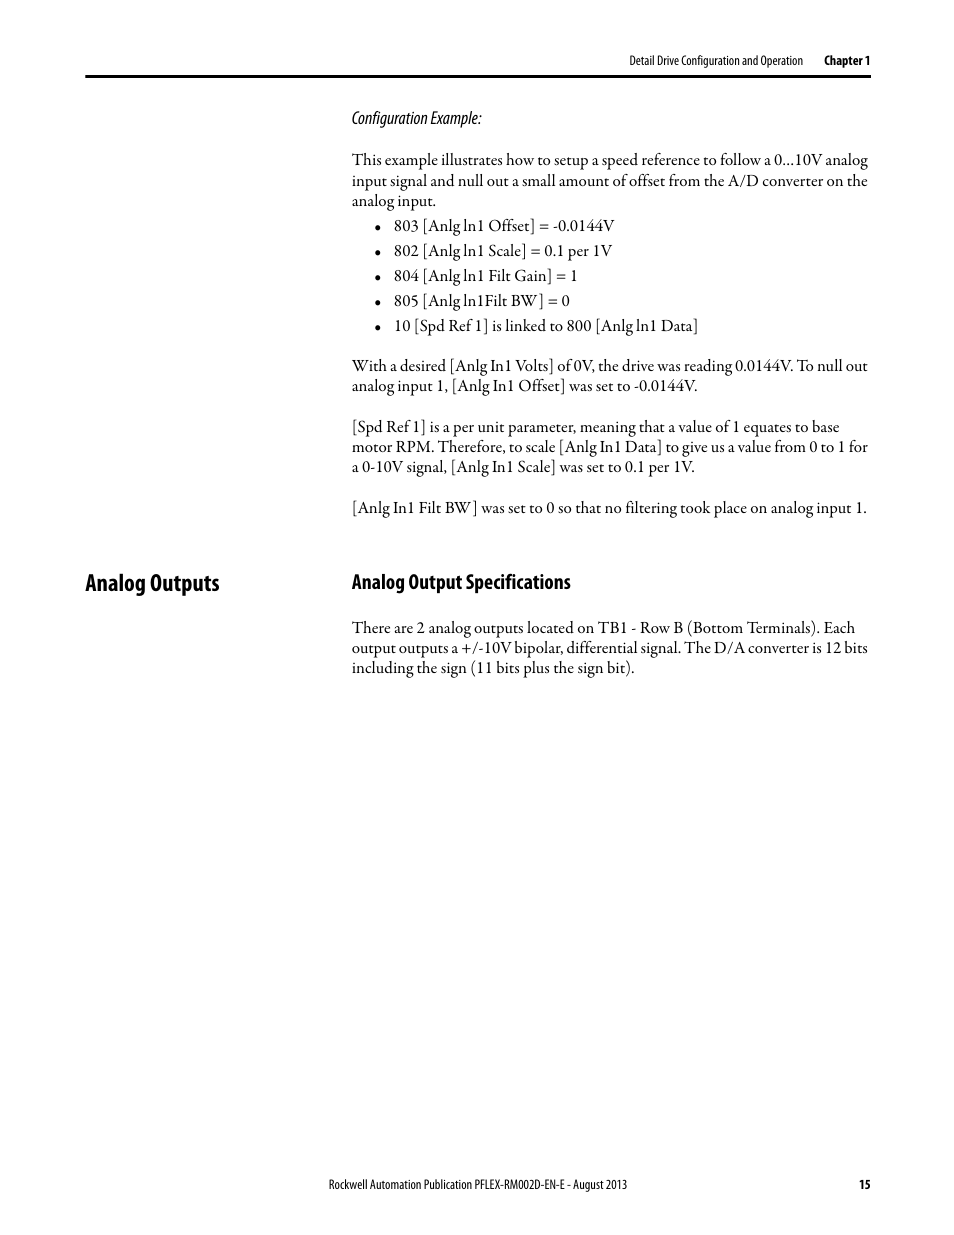 Analog outputs, Analog output specifications | Rockwell Automation 20D PowerFlex 700S with Phase I Control Reference Manual User Manual | Page 15 / 190